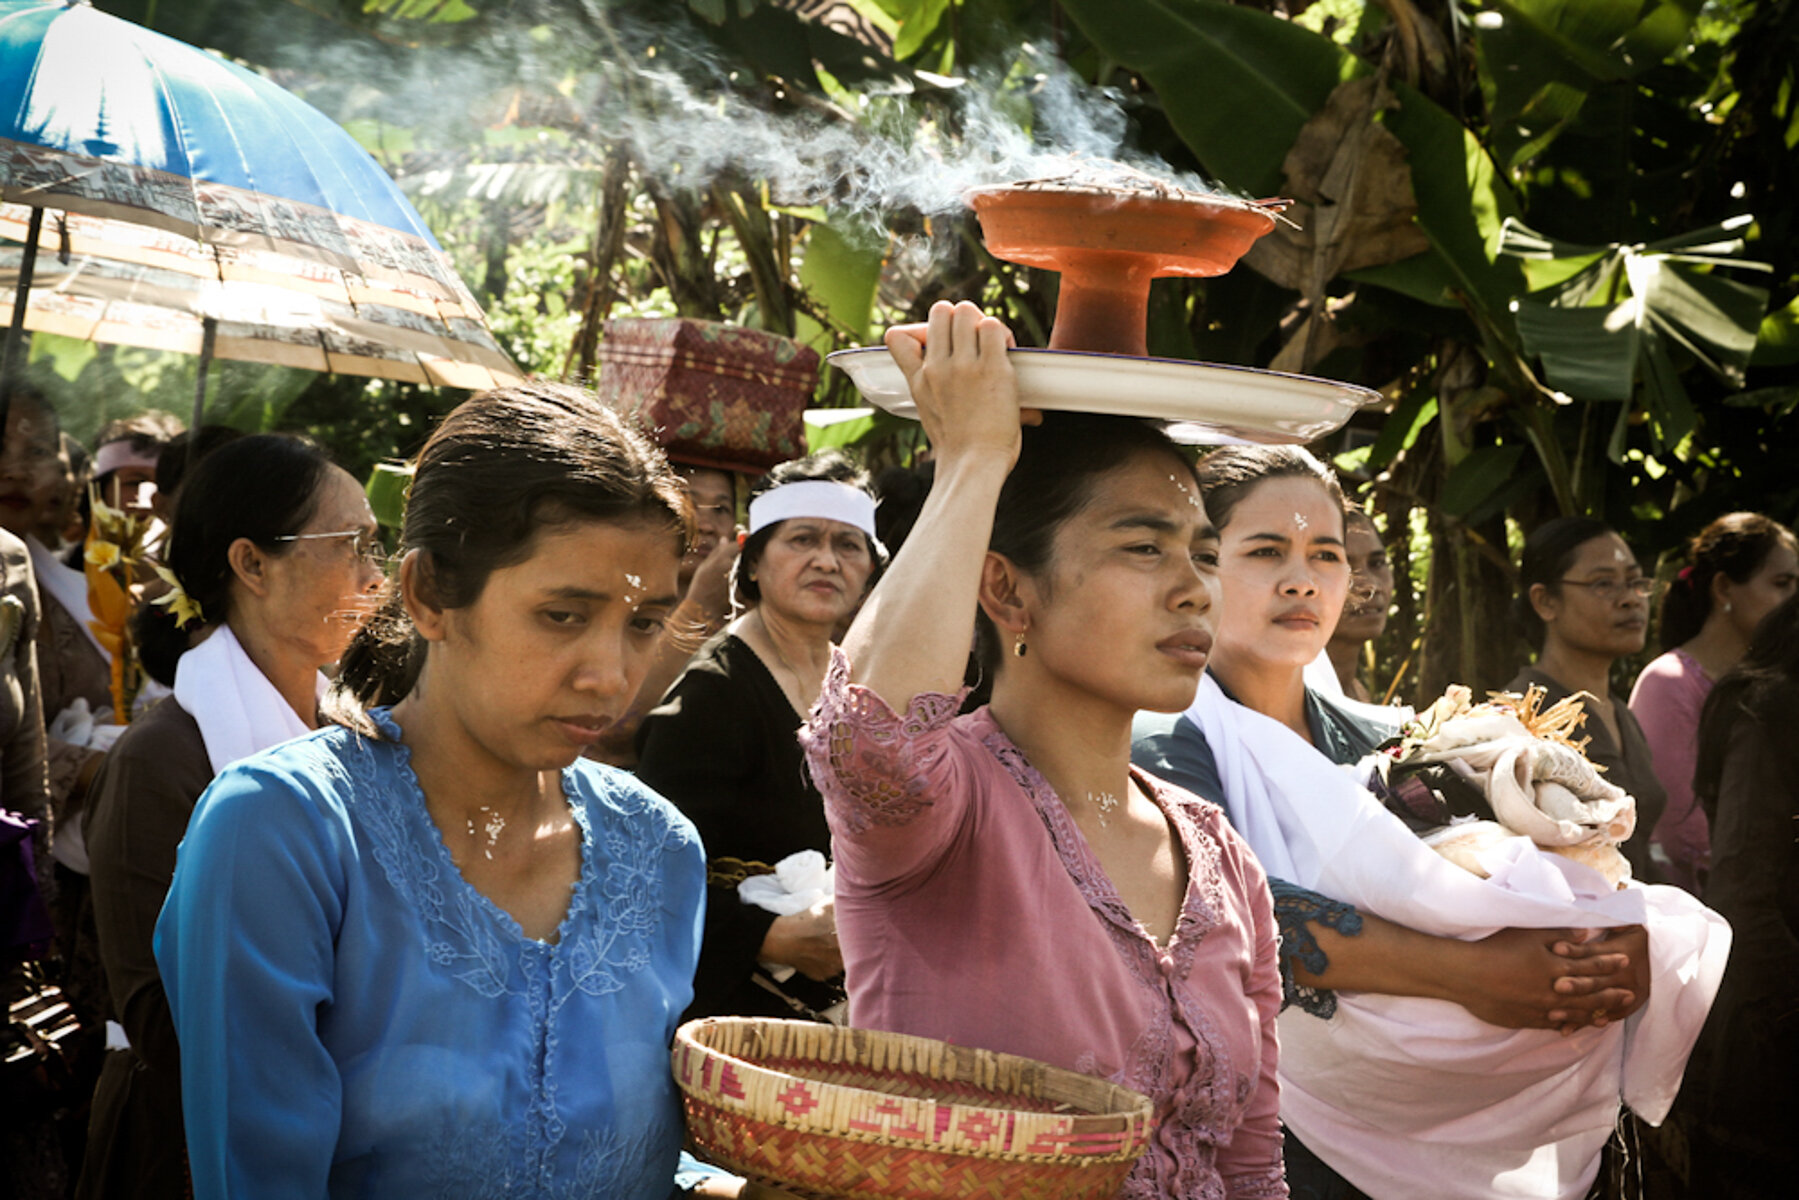  Women at cremation ceremony | Bali, Indonesia 